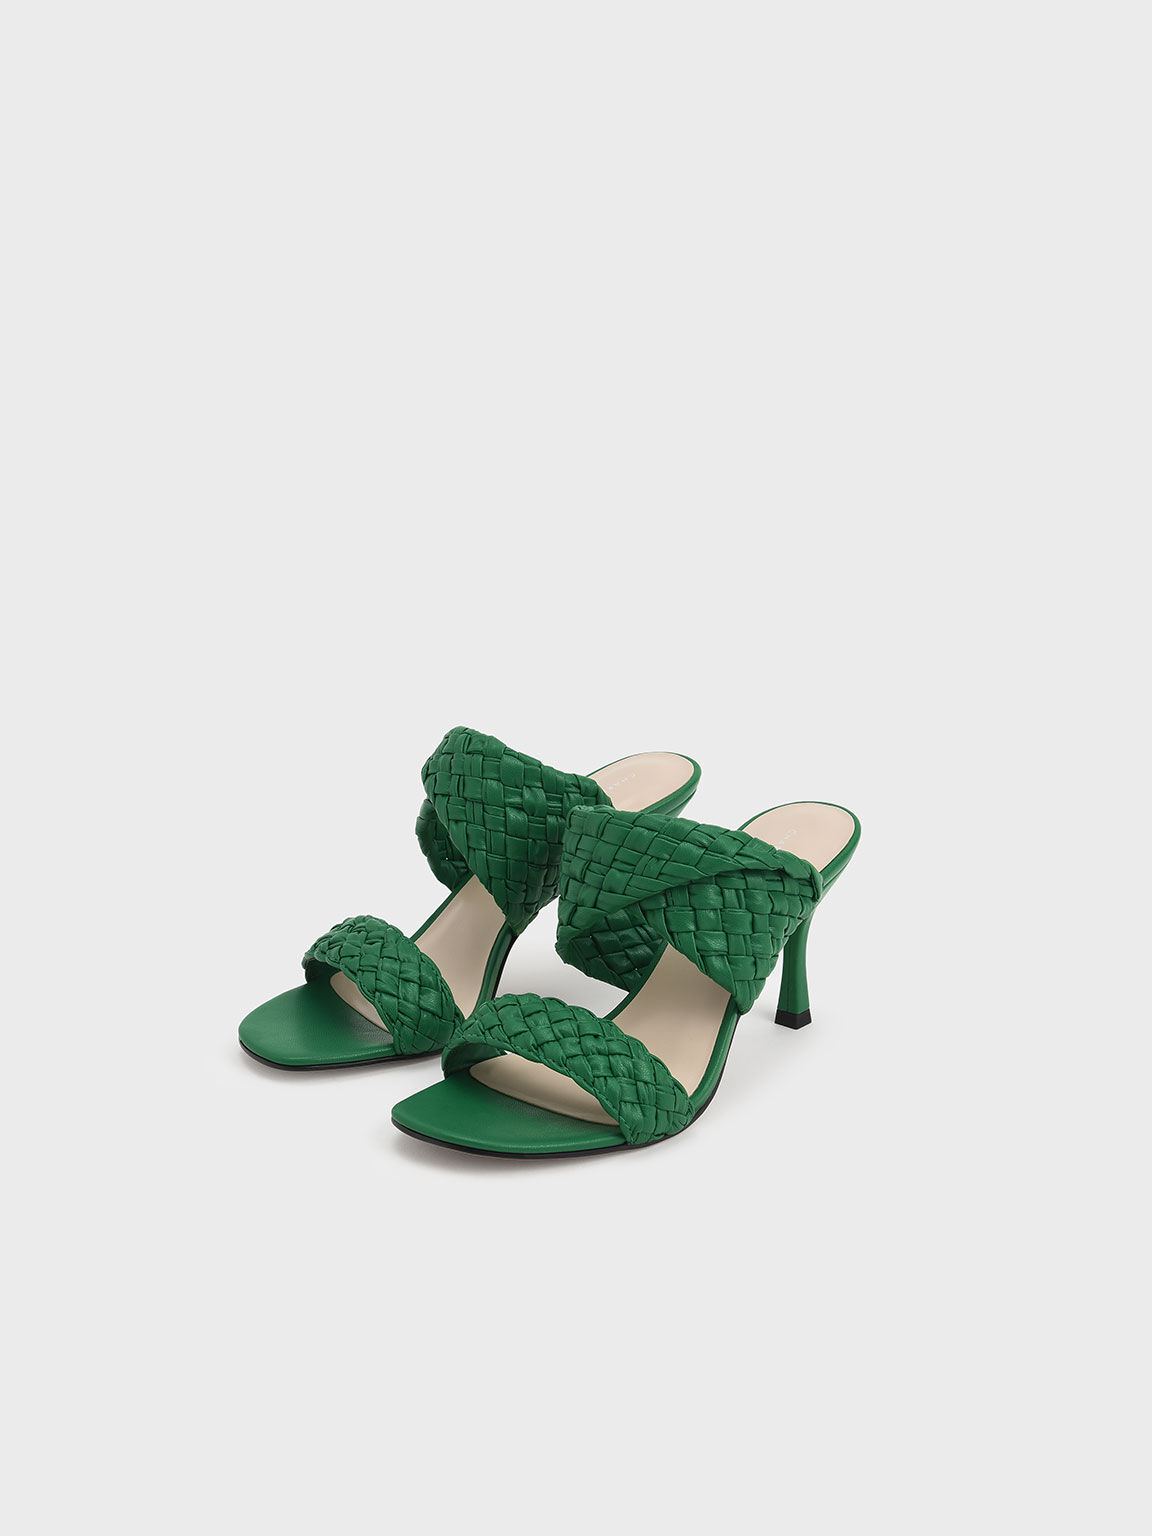 Sling back high heel Green color Made in Italy - Clef Shoes & Accessories